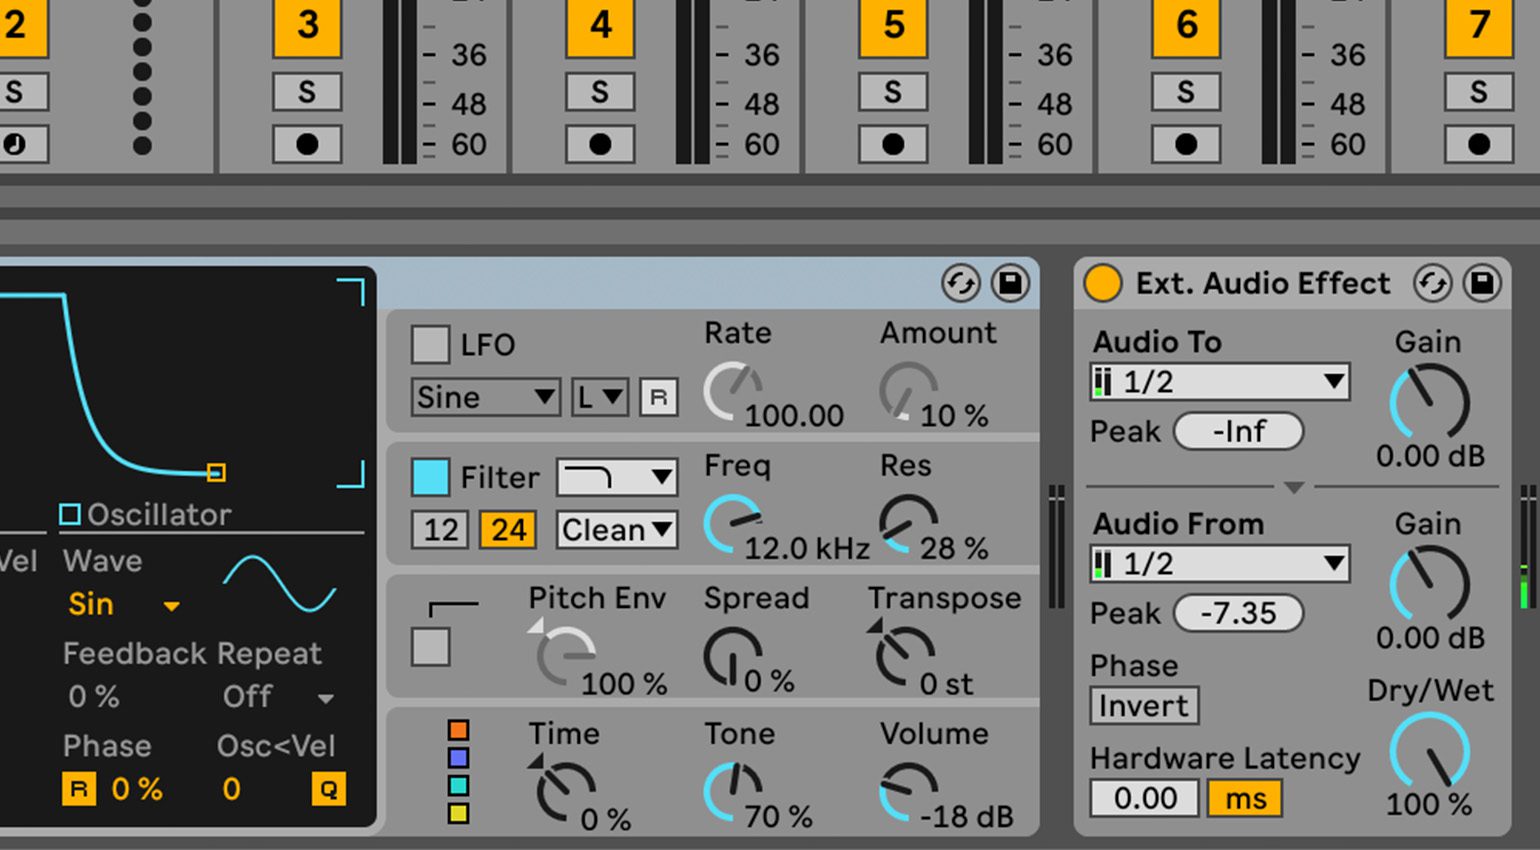 External Audio Effect in Ableton Live